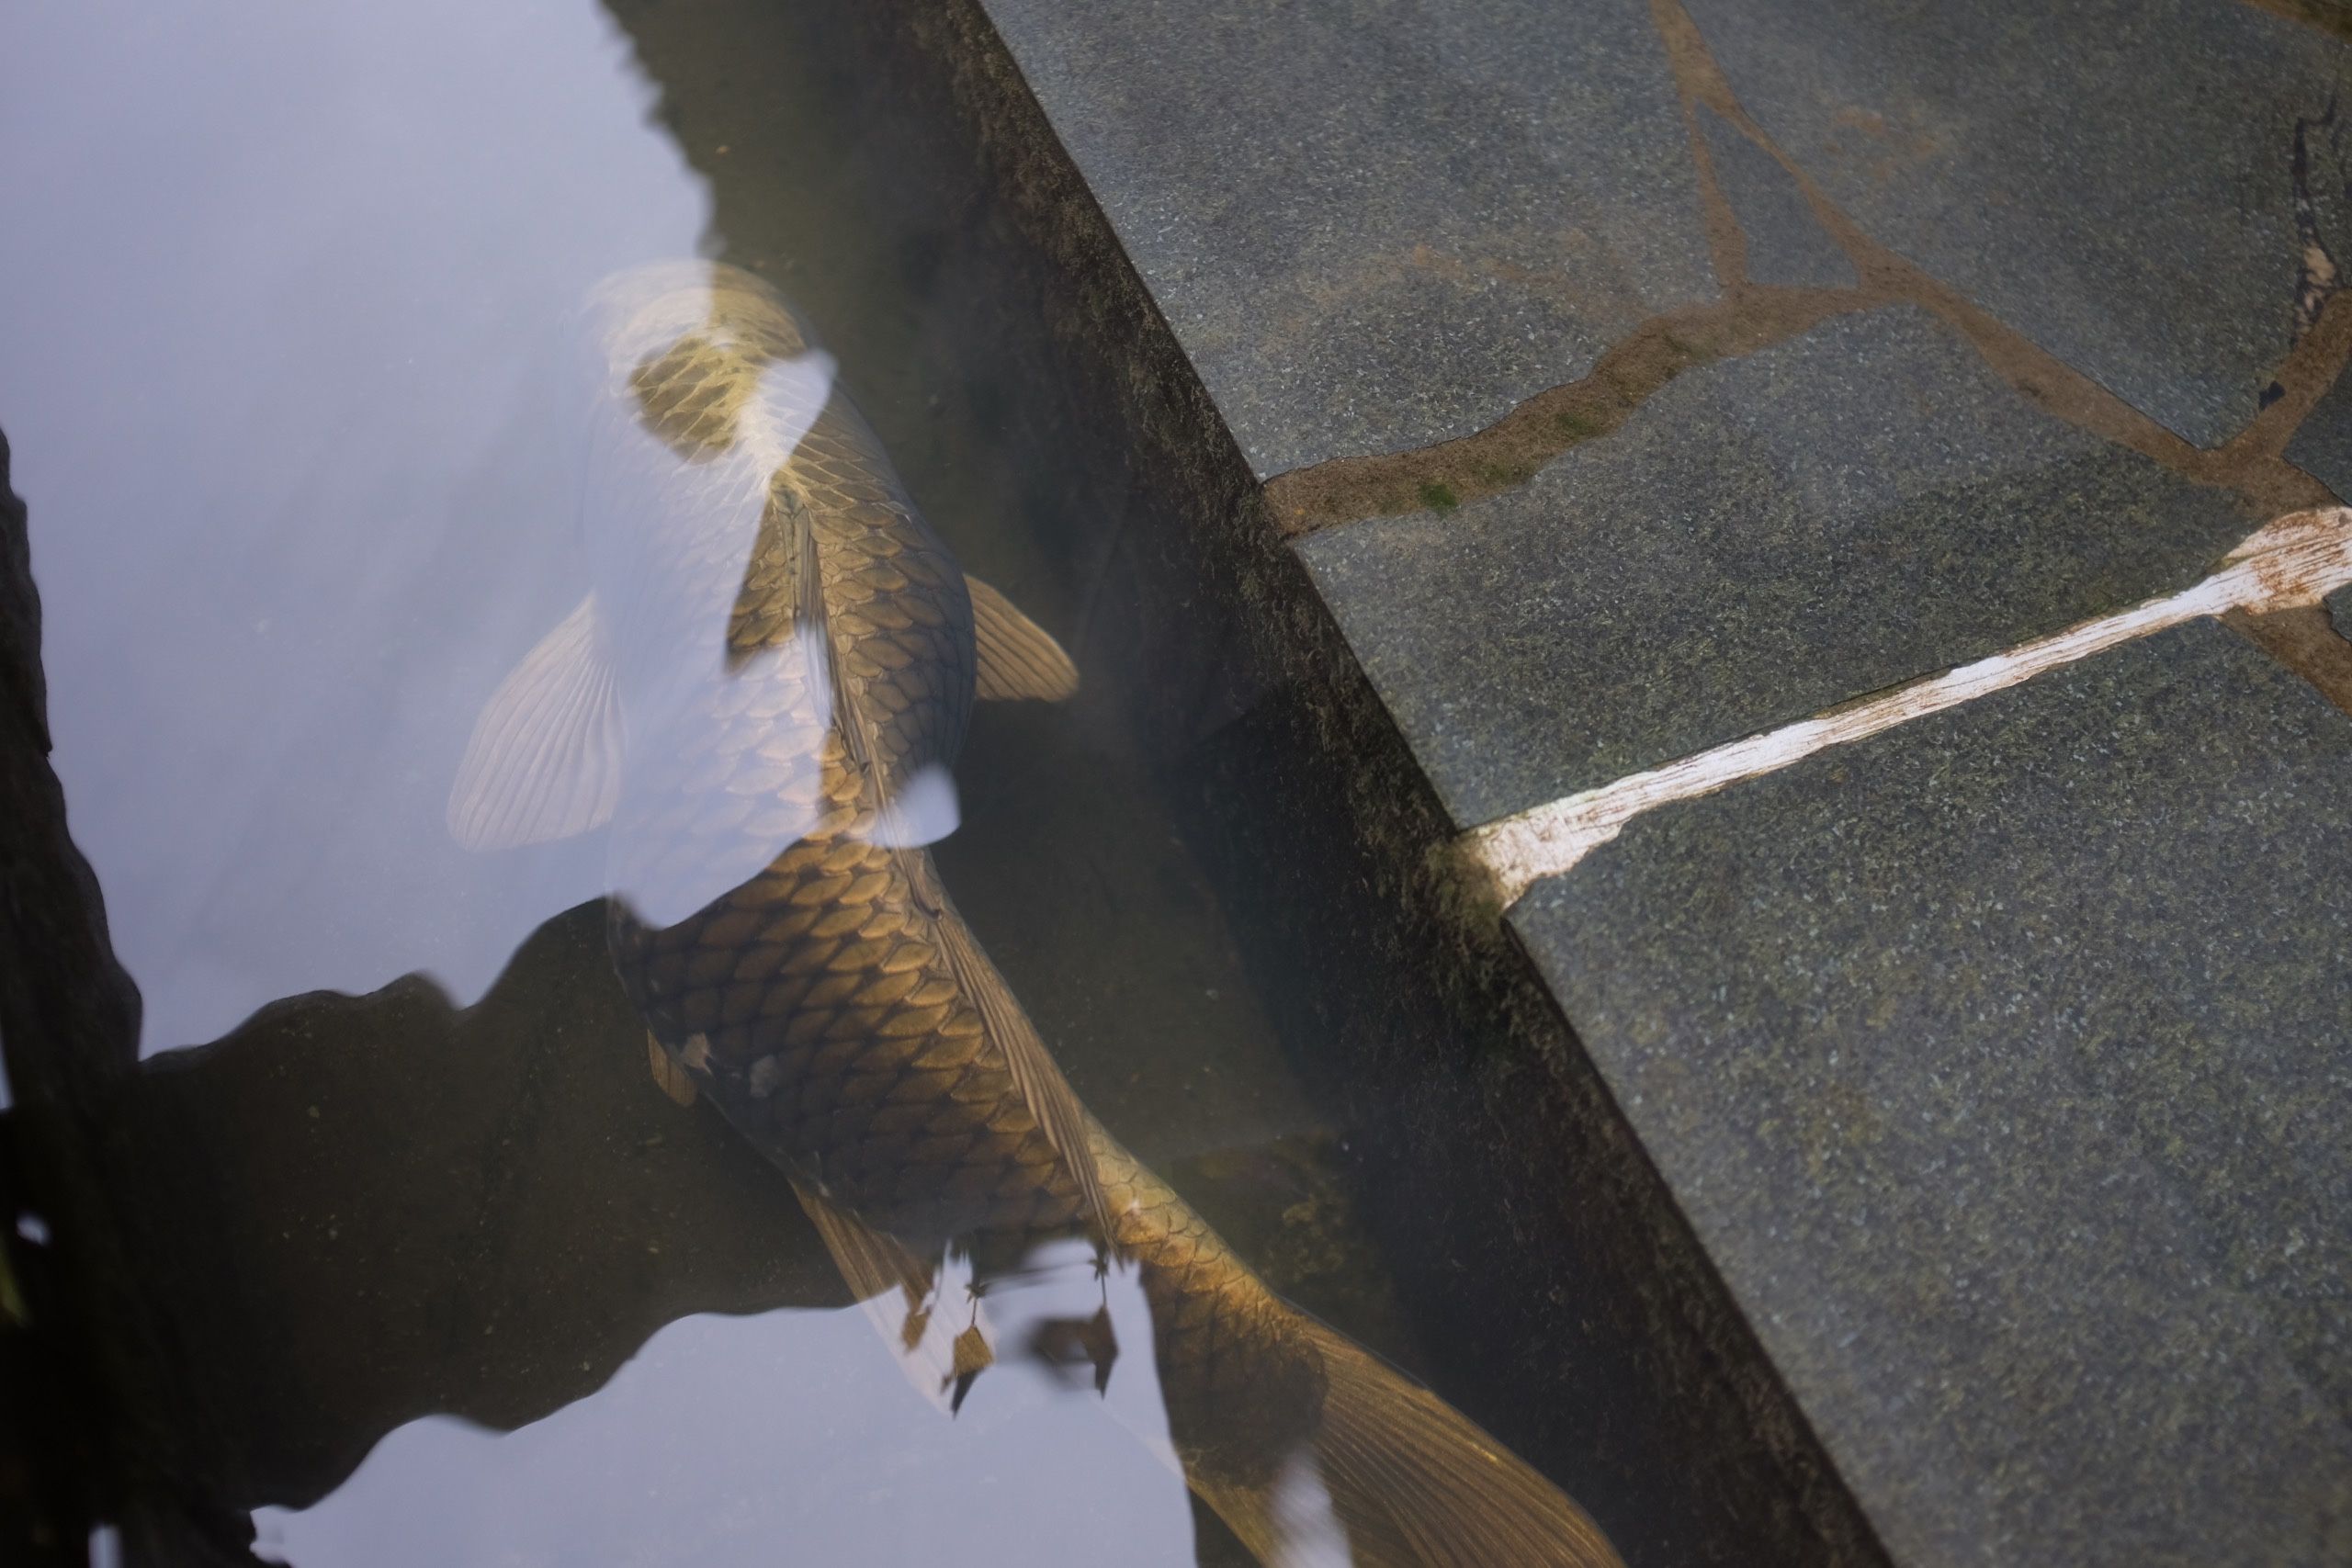 A carp with a large curve in its spine swims in a canal by a street paved with large stones.